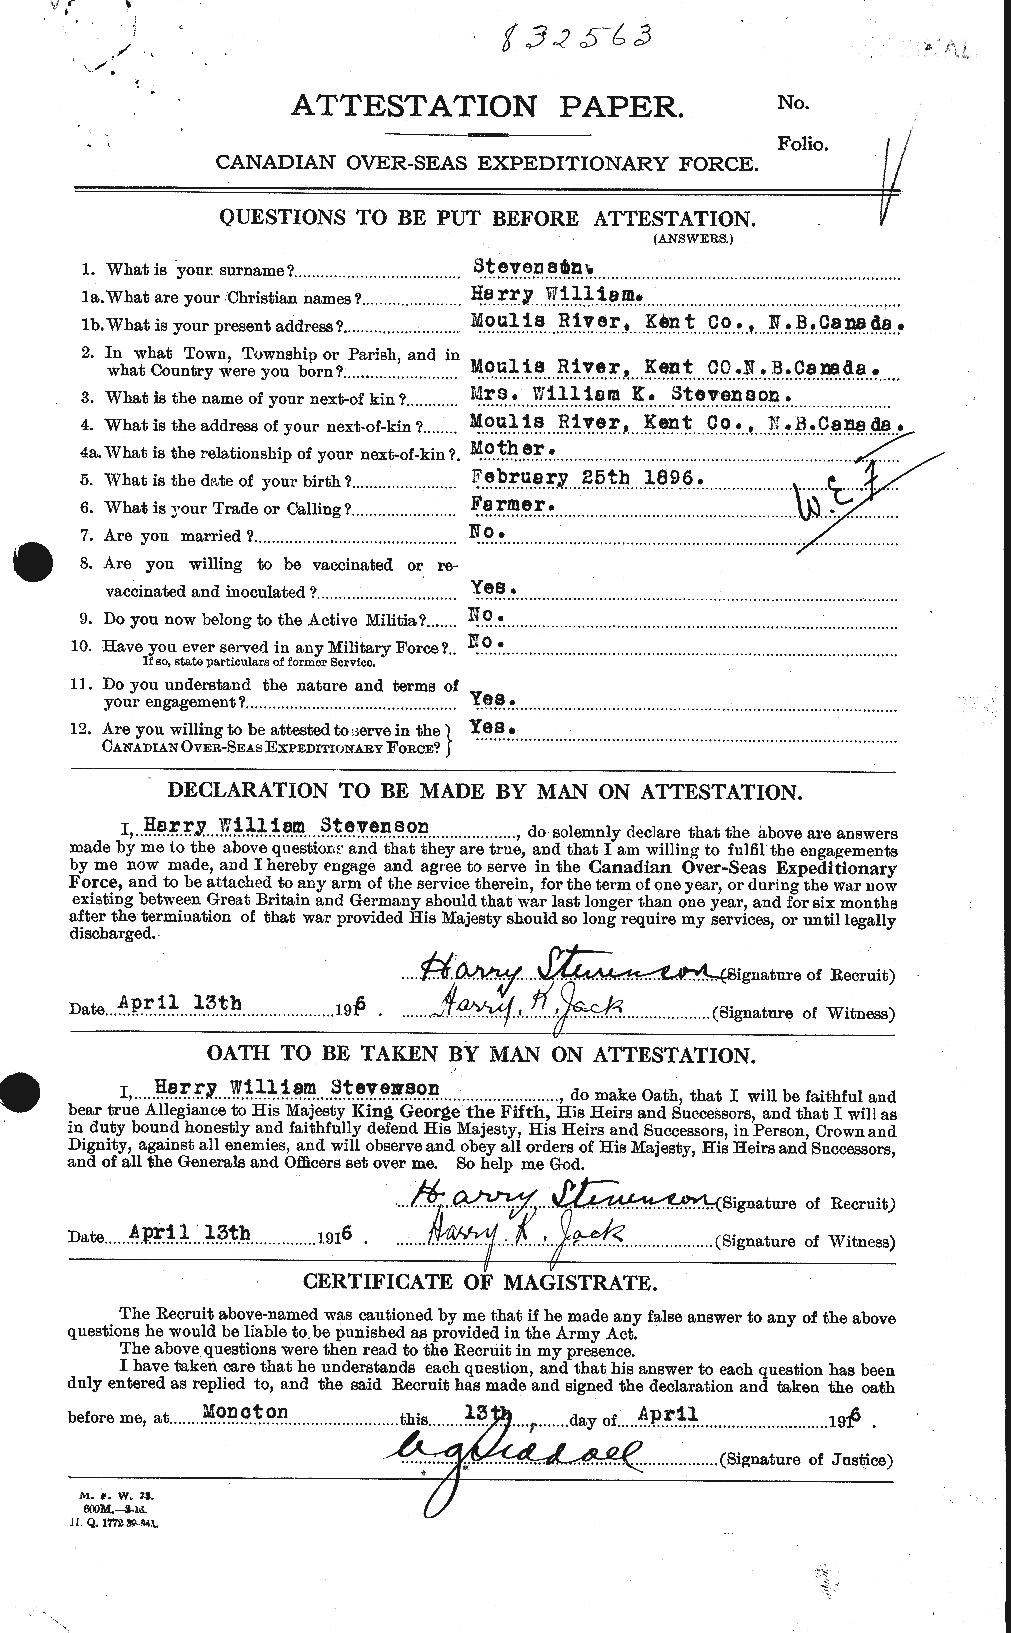 Personnel Records of the First World War - CEF 119063a